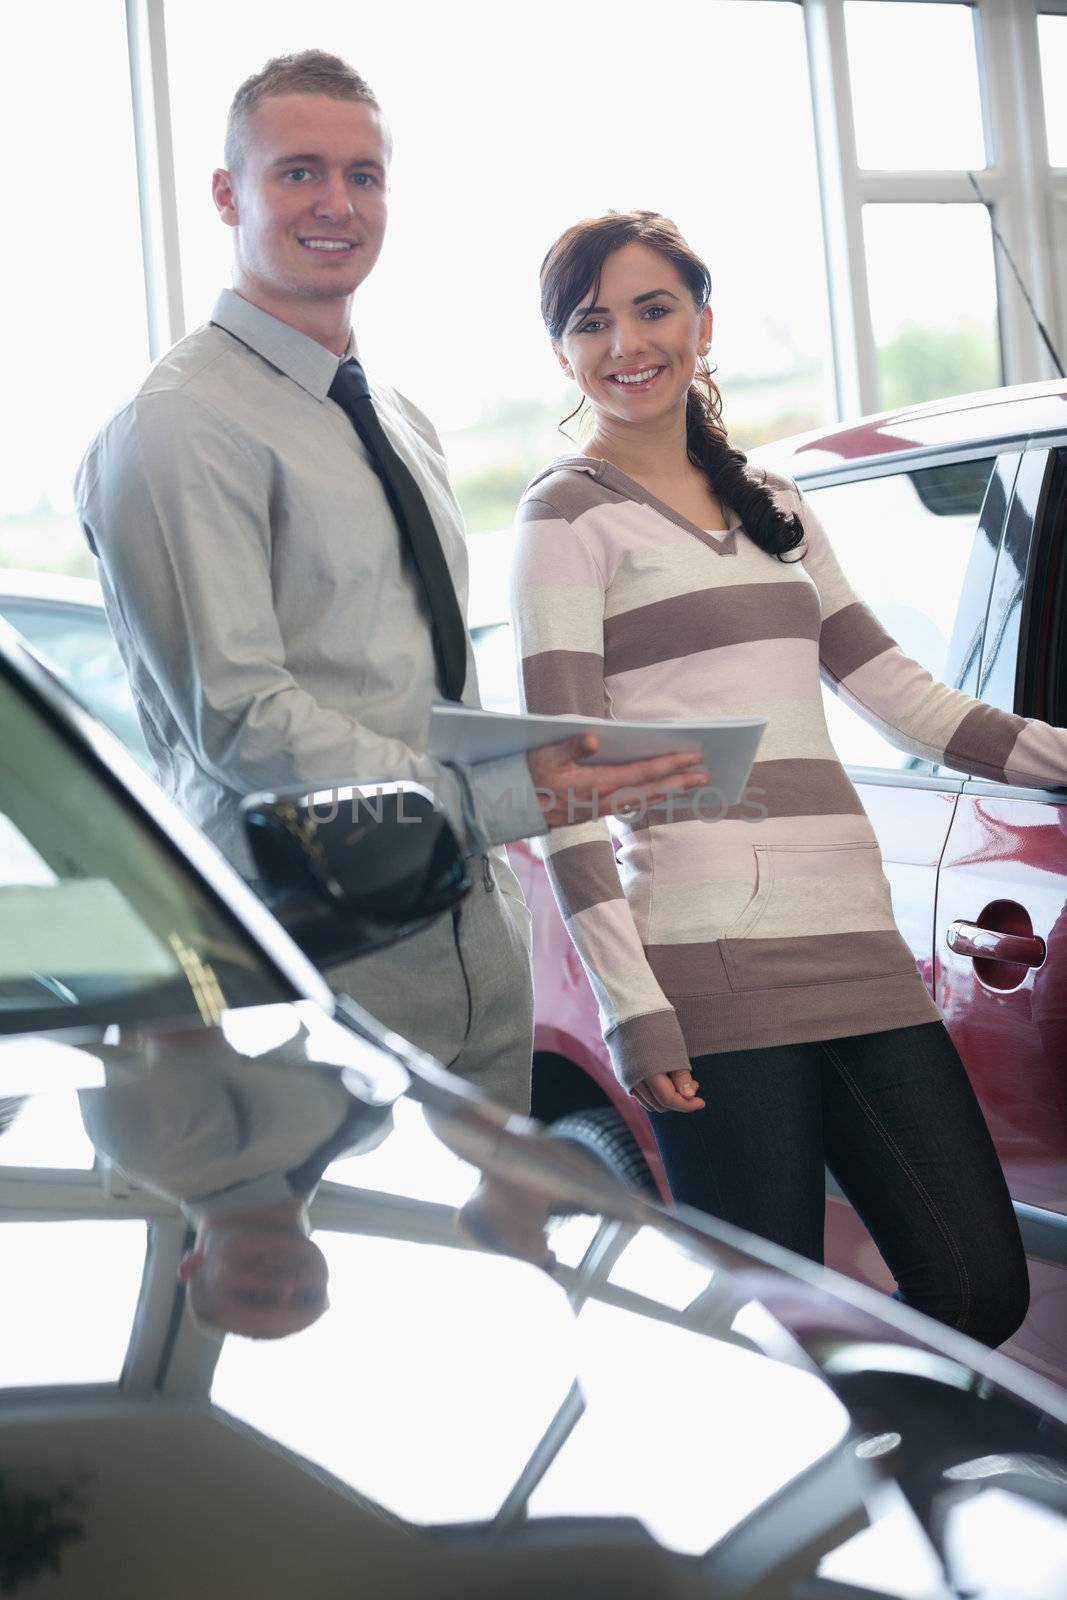 Salesman and a woman standing next to a car by Wavebreakmedia